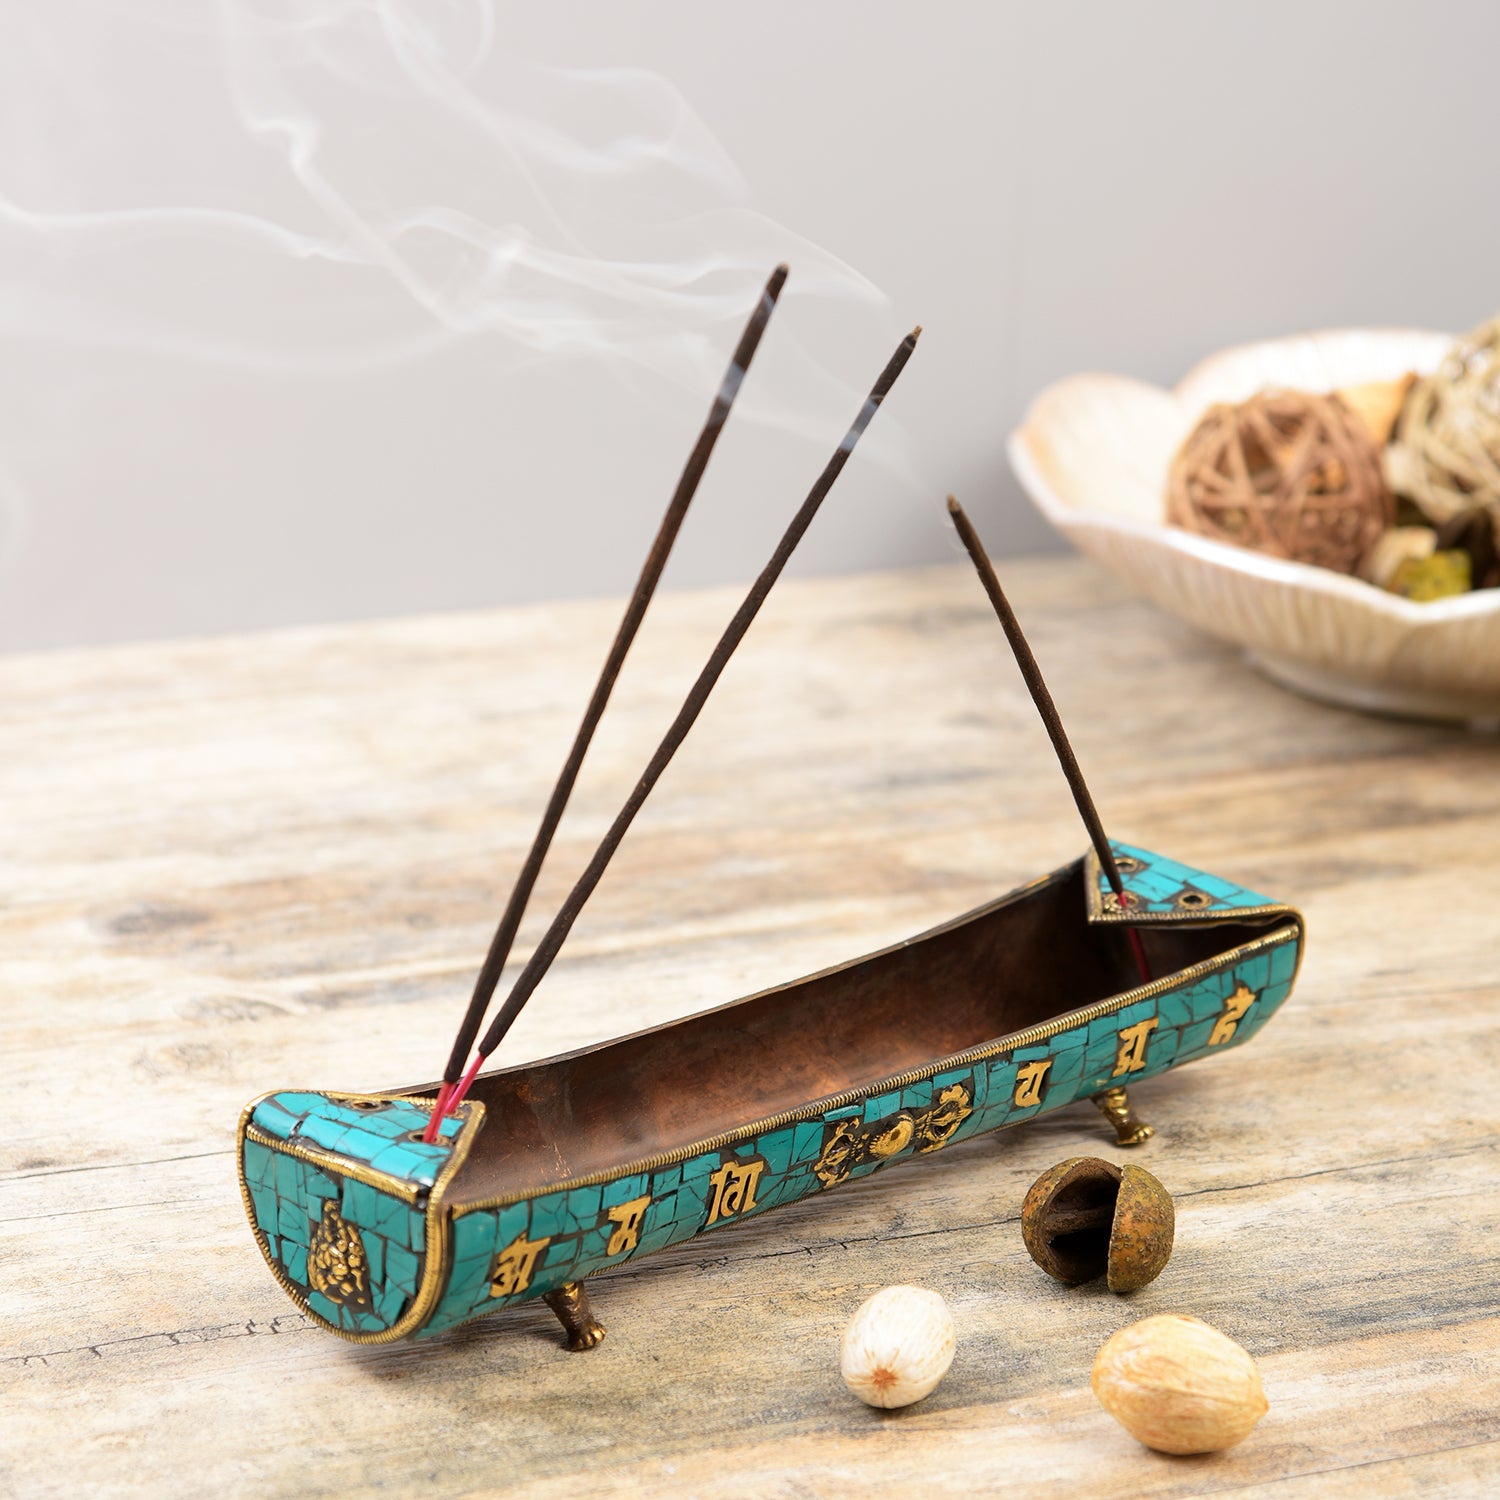 The Turquoise Boat - Incense Holder